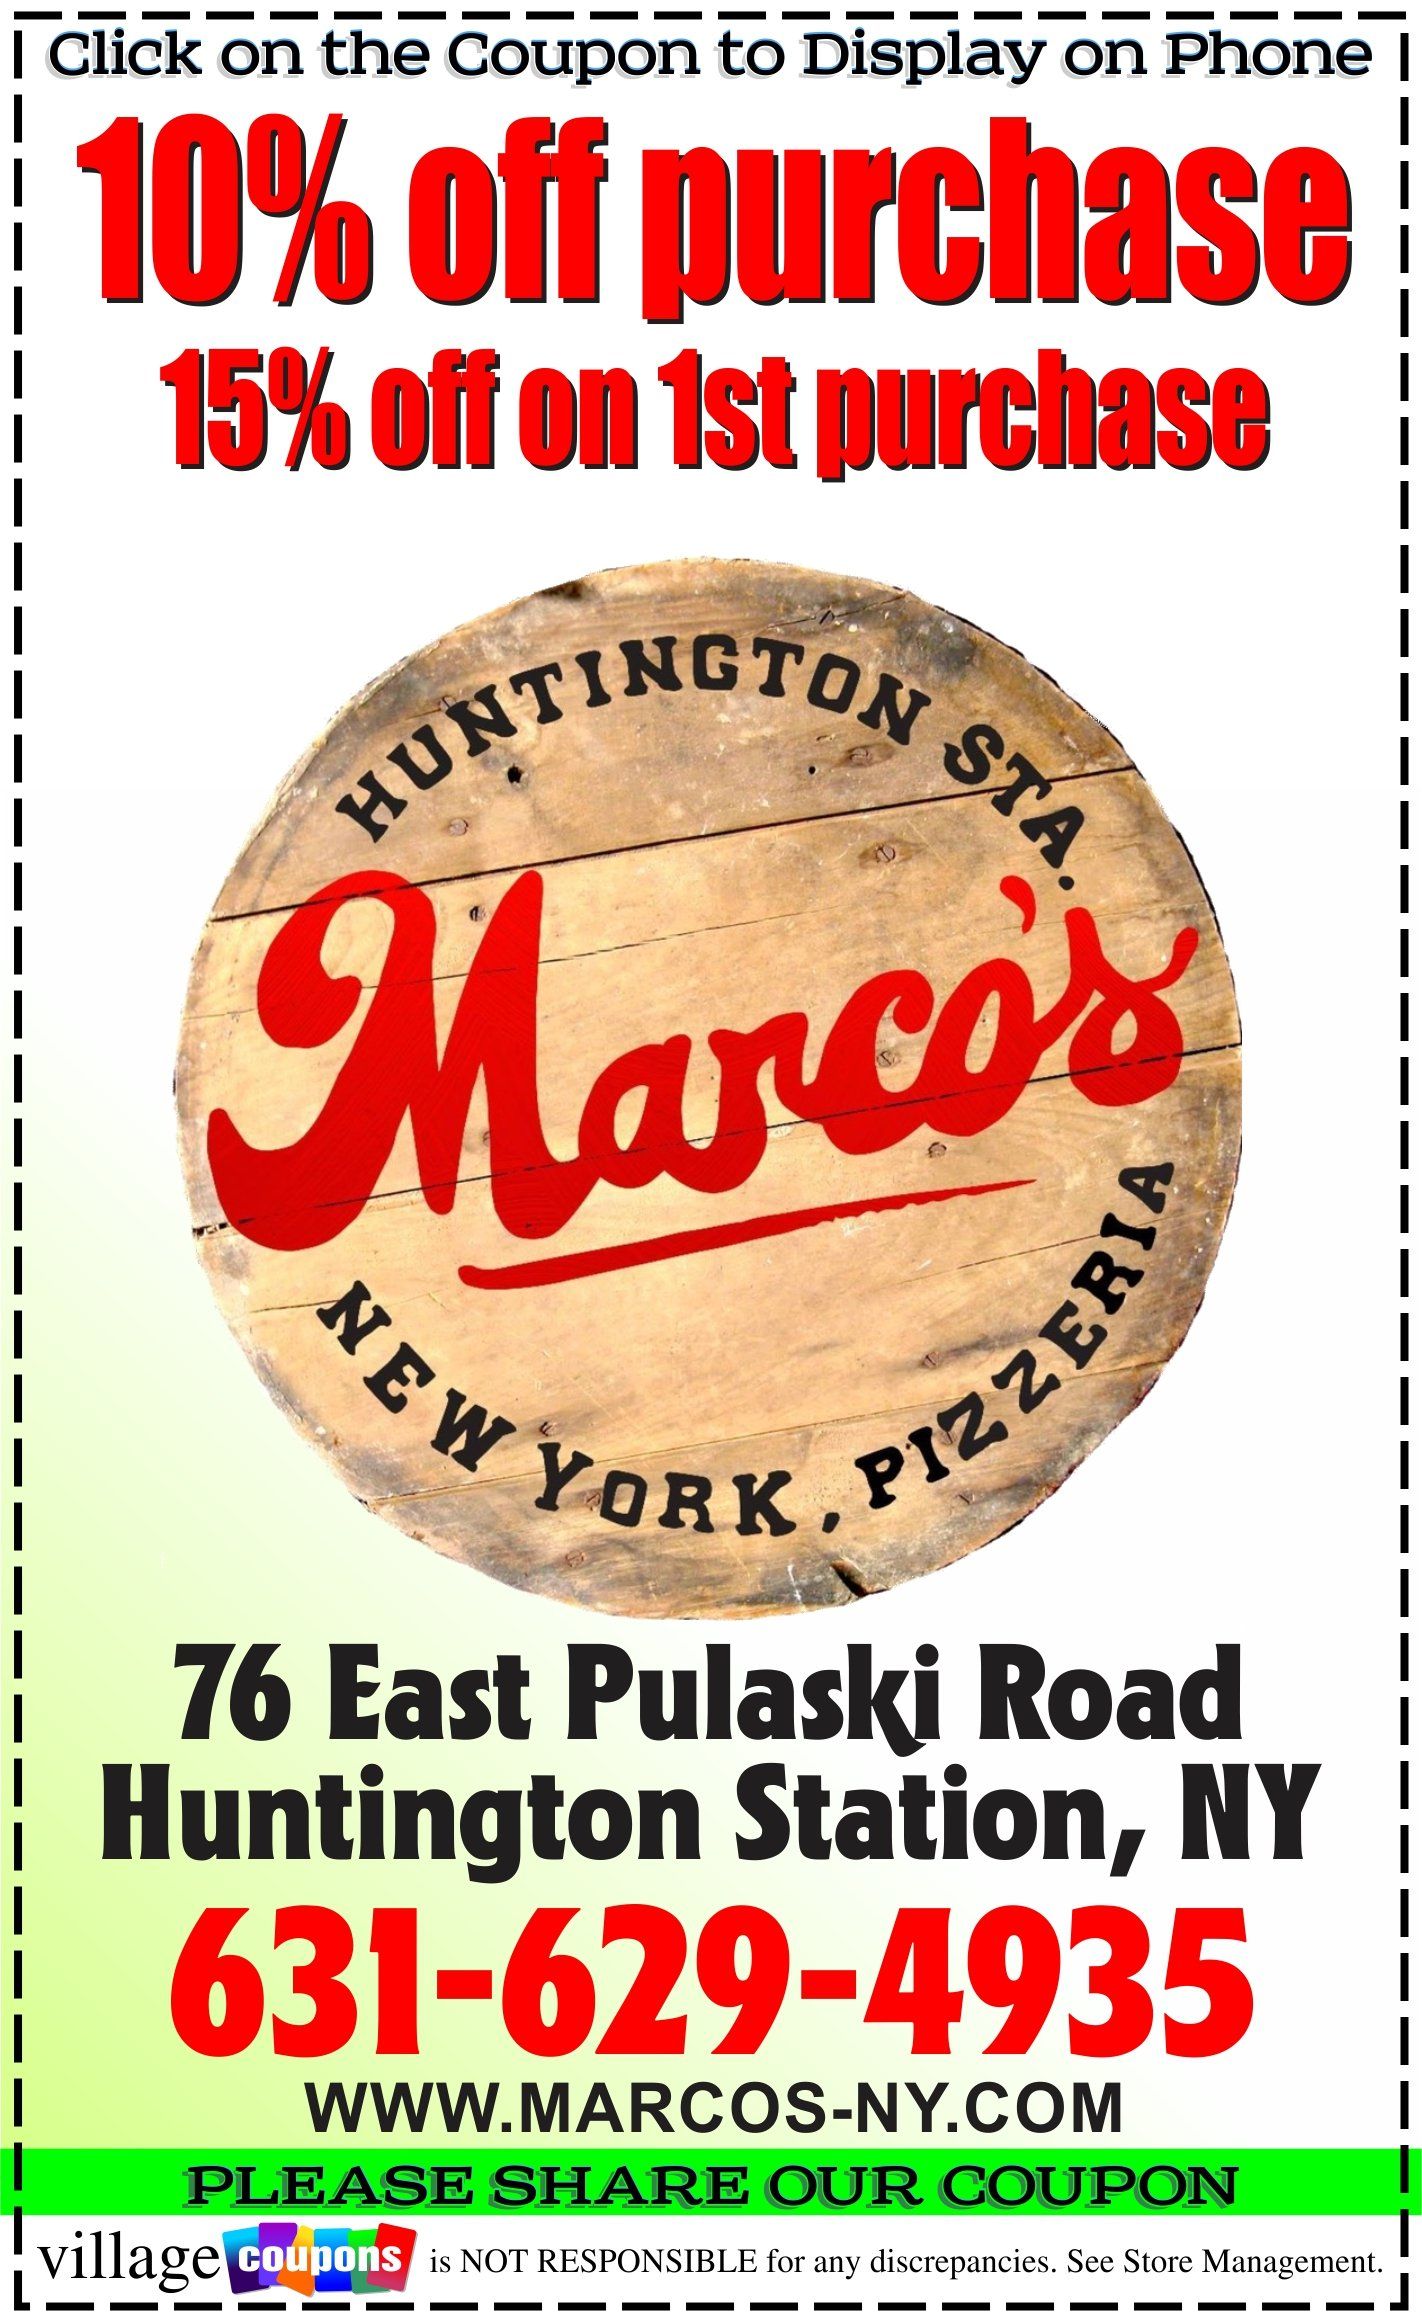 An advertisement for marco 's new york pizzeria